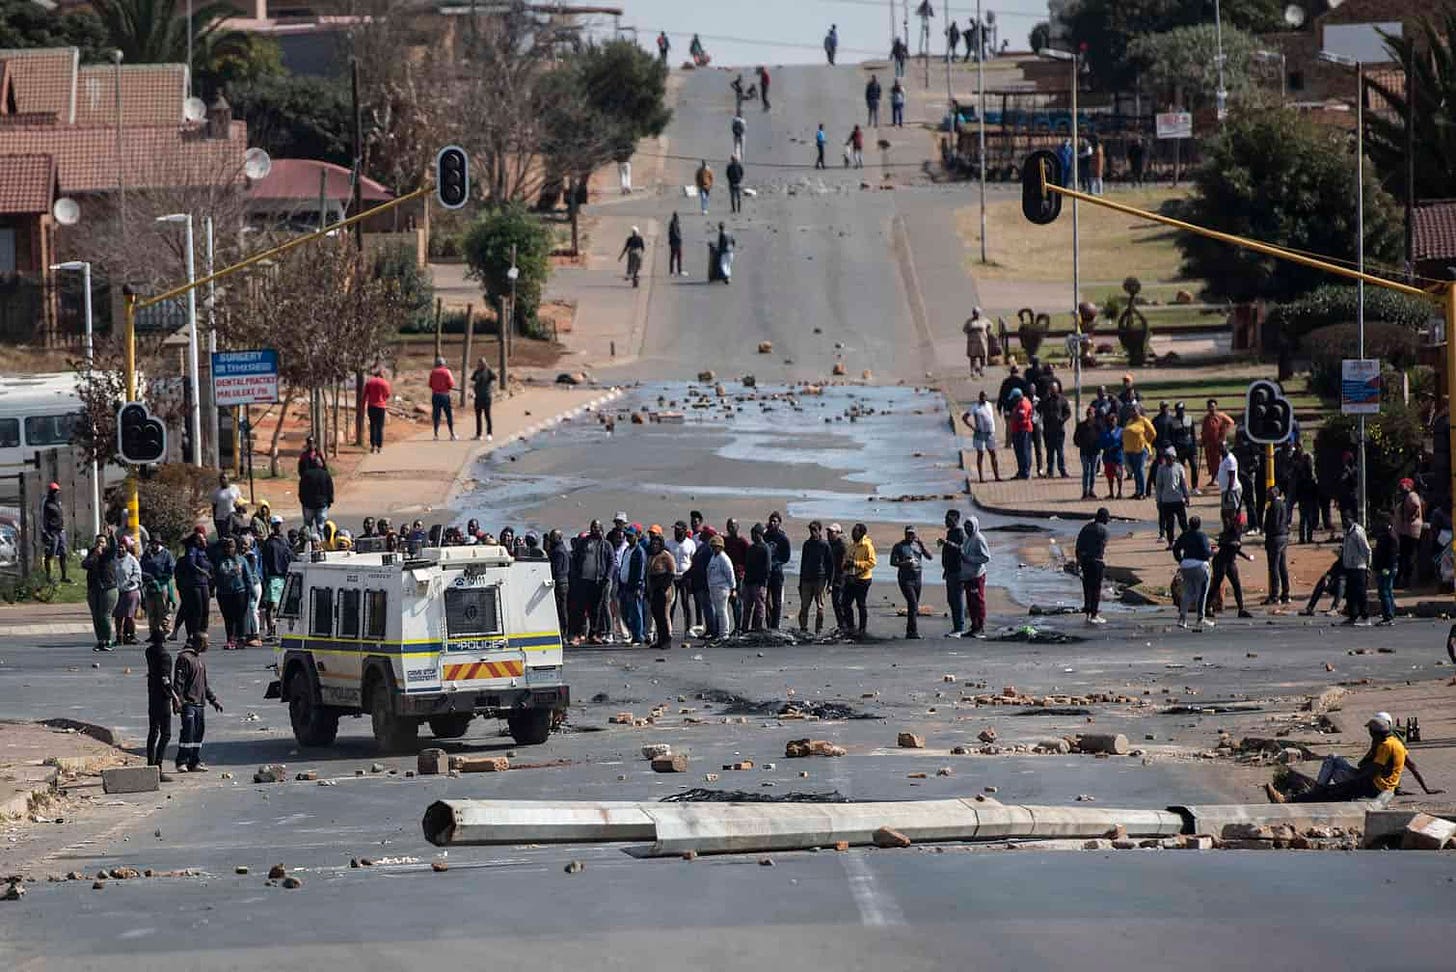 Failed state: SA ability to function as a democracy is increasingly questionable